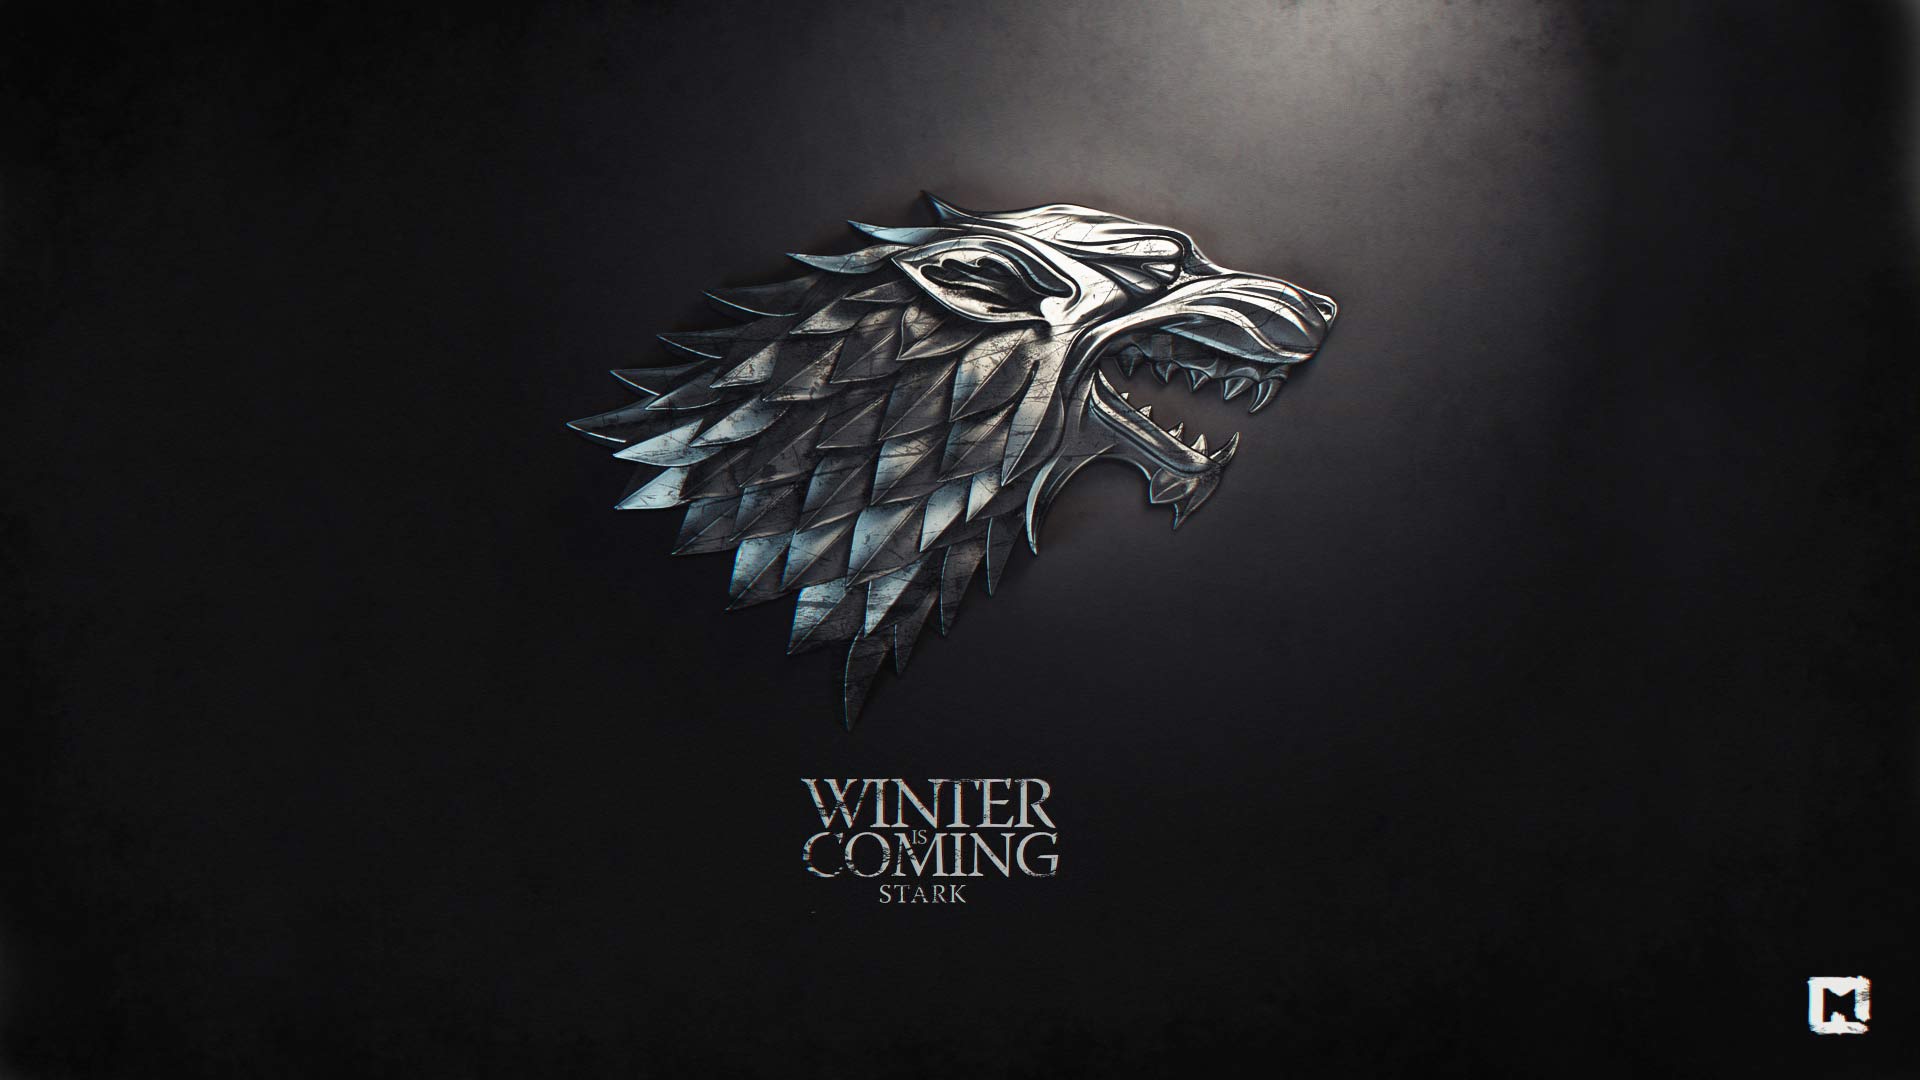 Game of Thrones Wallpaper & Background. Game of Thrones Wallpaper